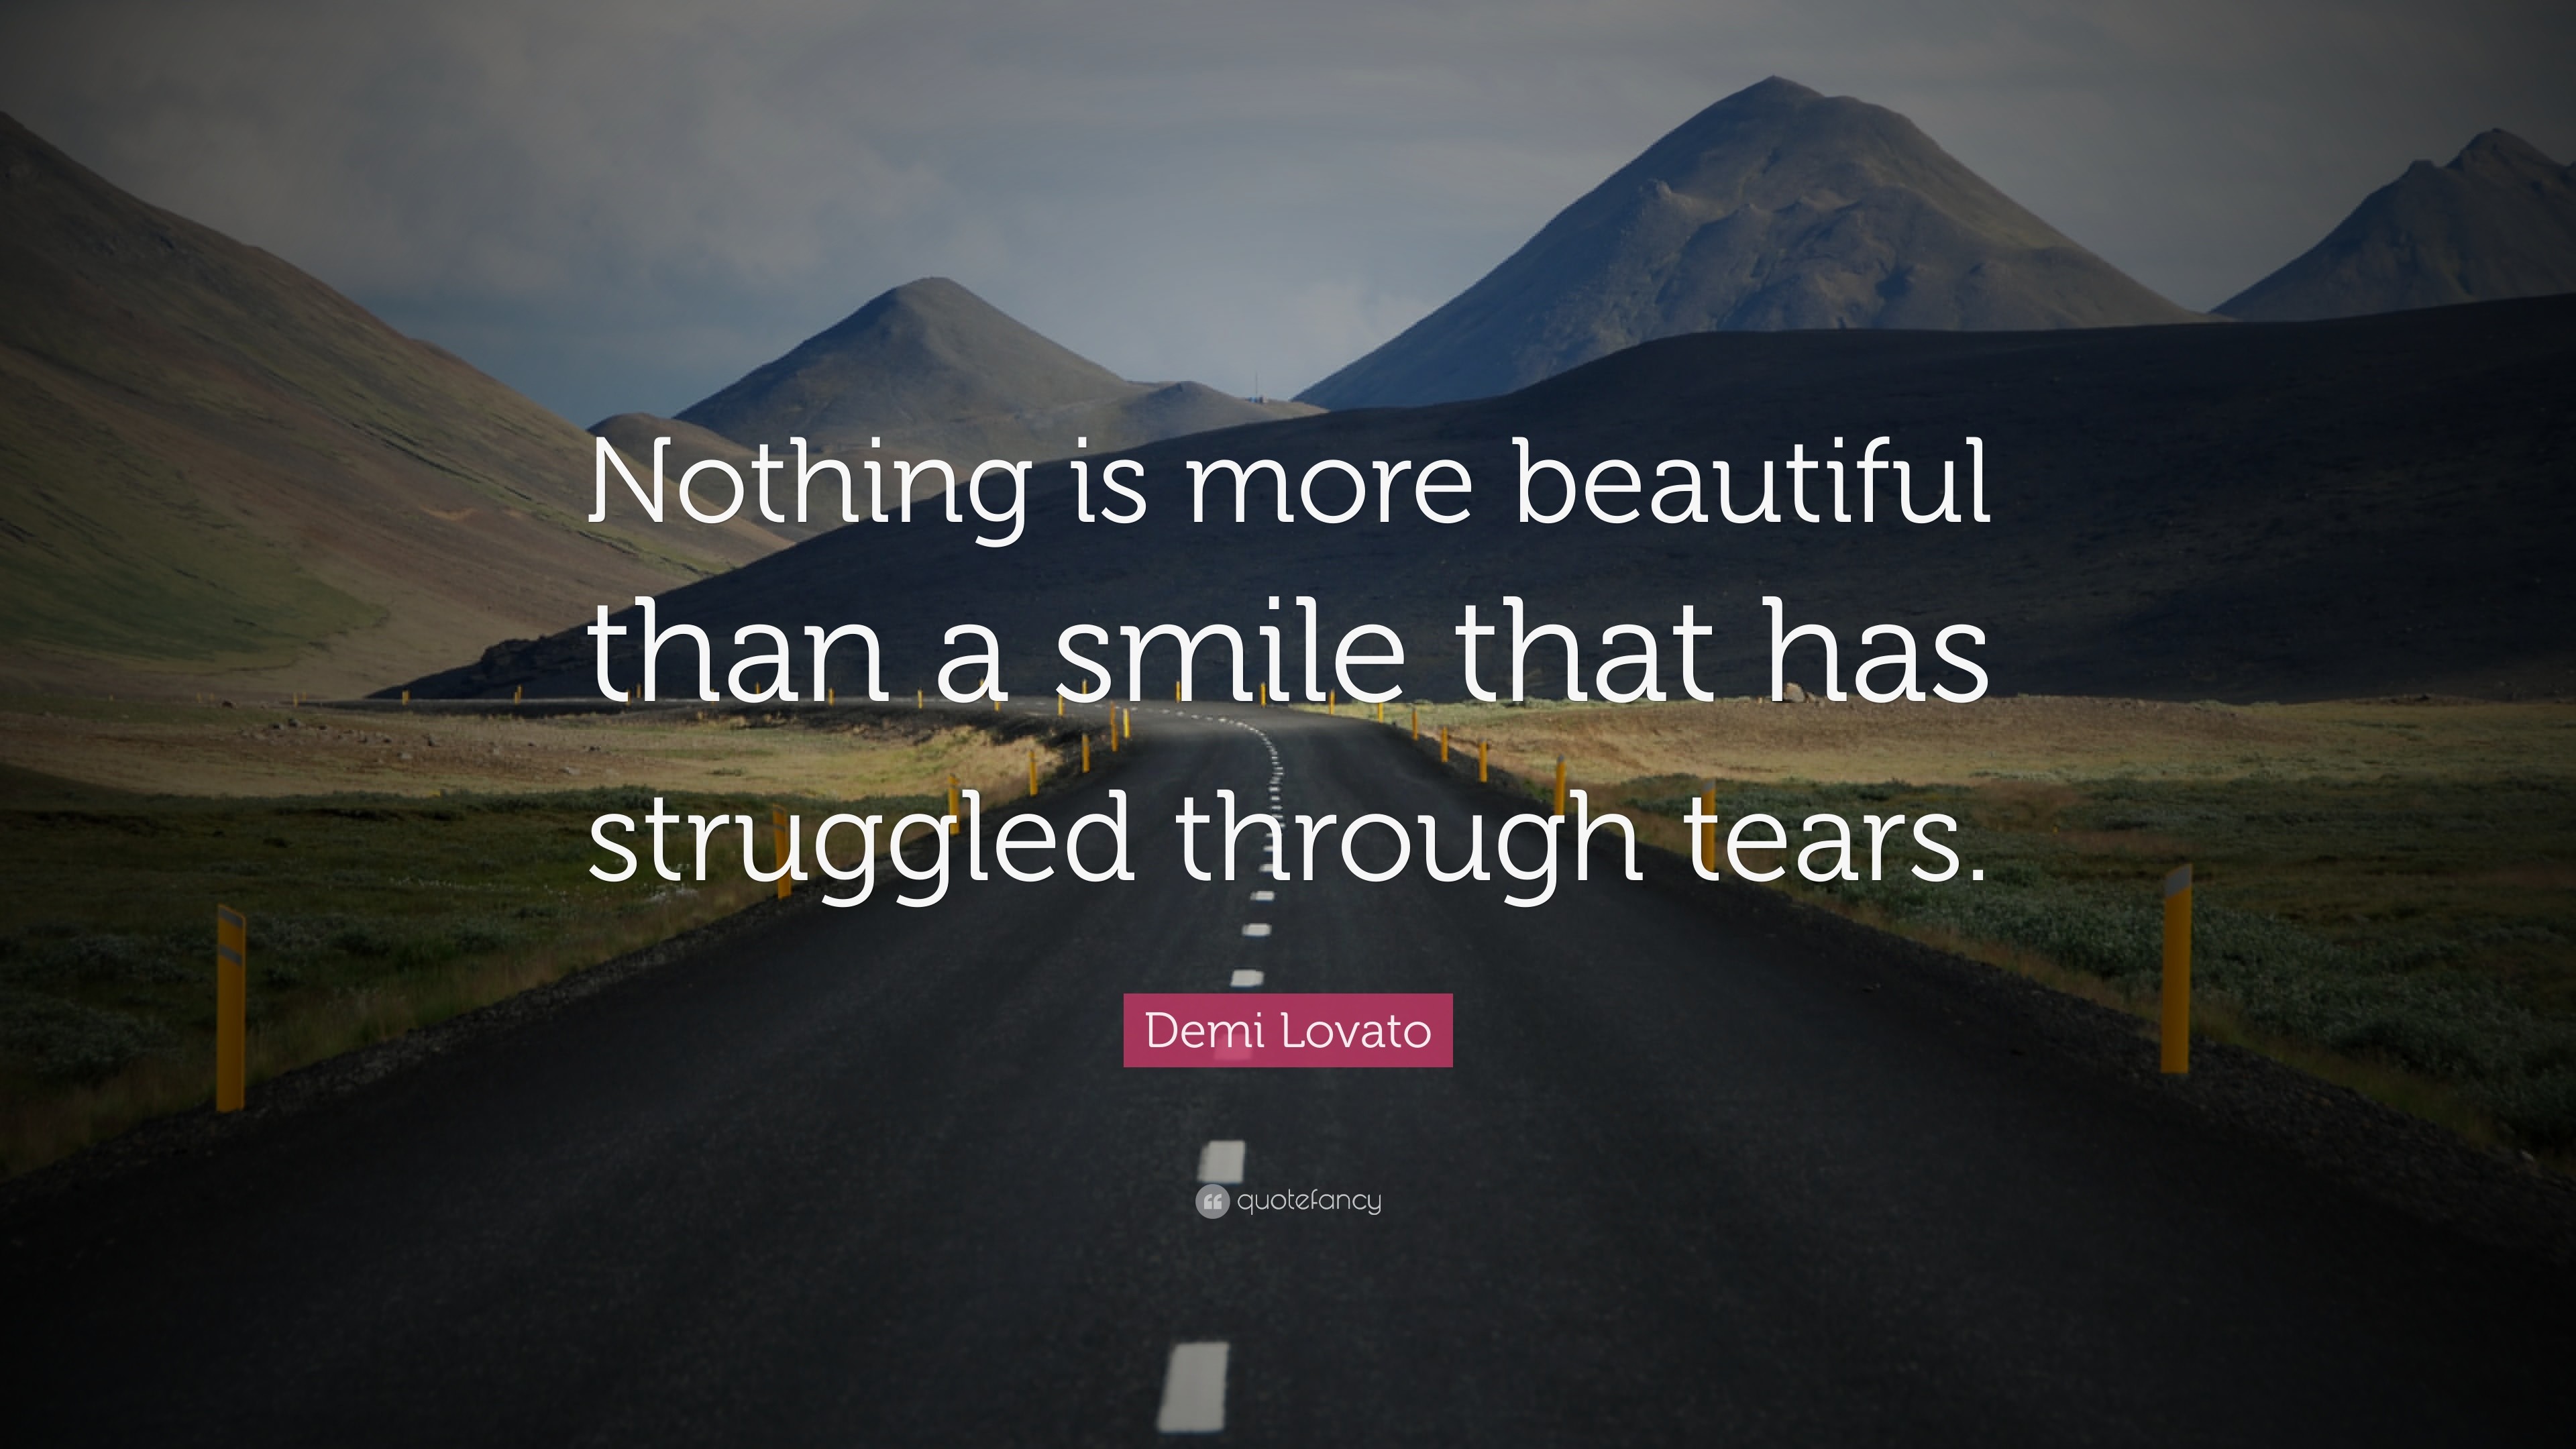 3840x2160 Smile Quotes: “Nothing is more beautiful than a smile that has struggled  through tears